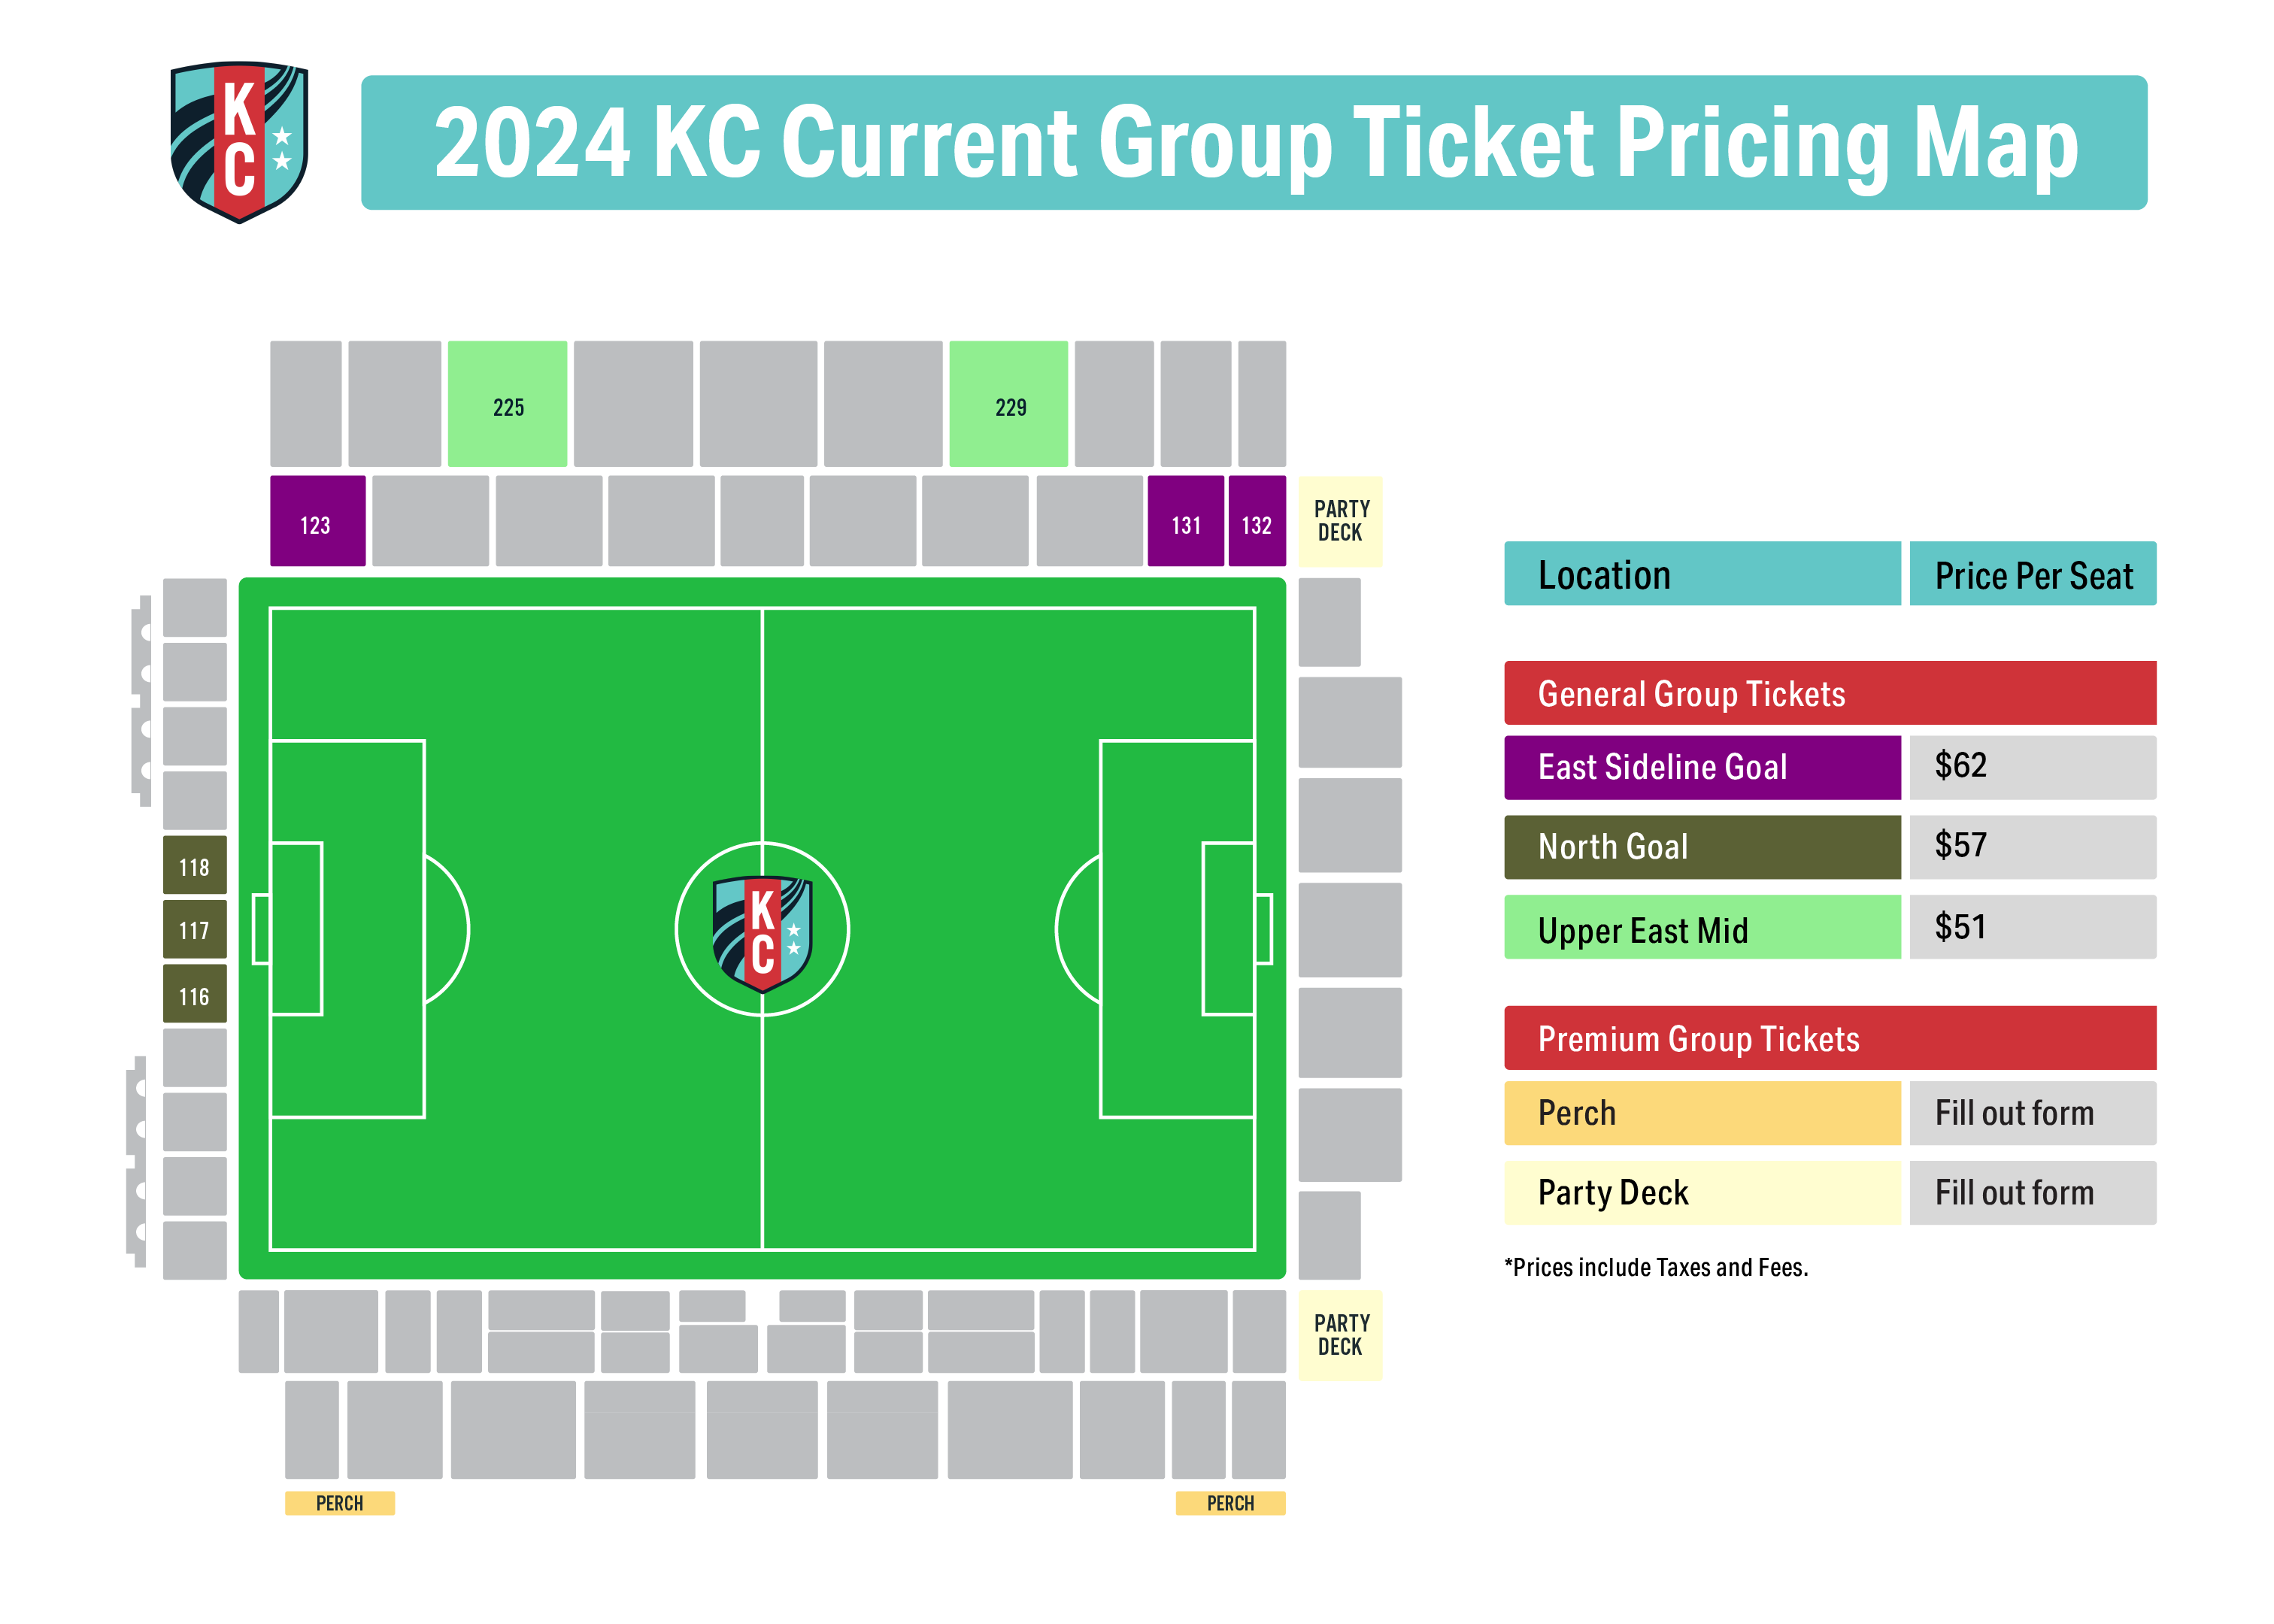 A pricing map of the KC Current Group Ticket rates.